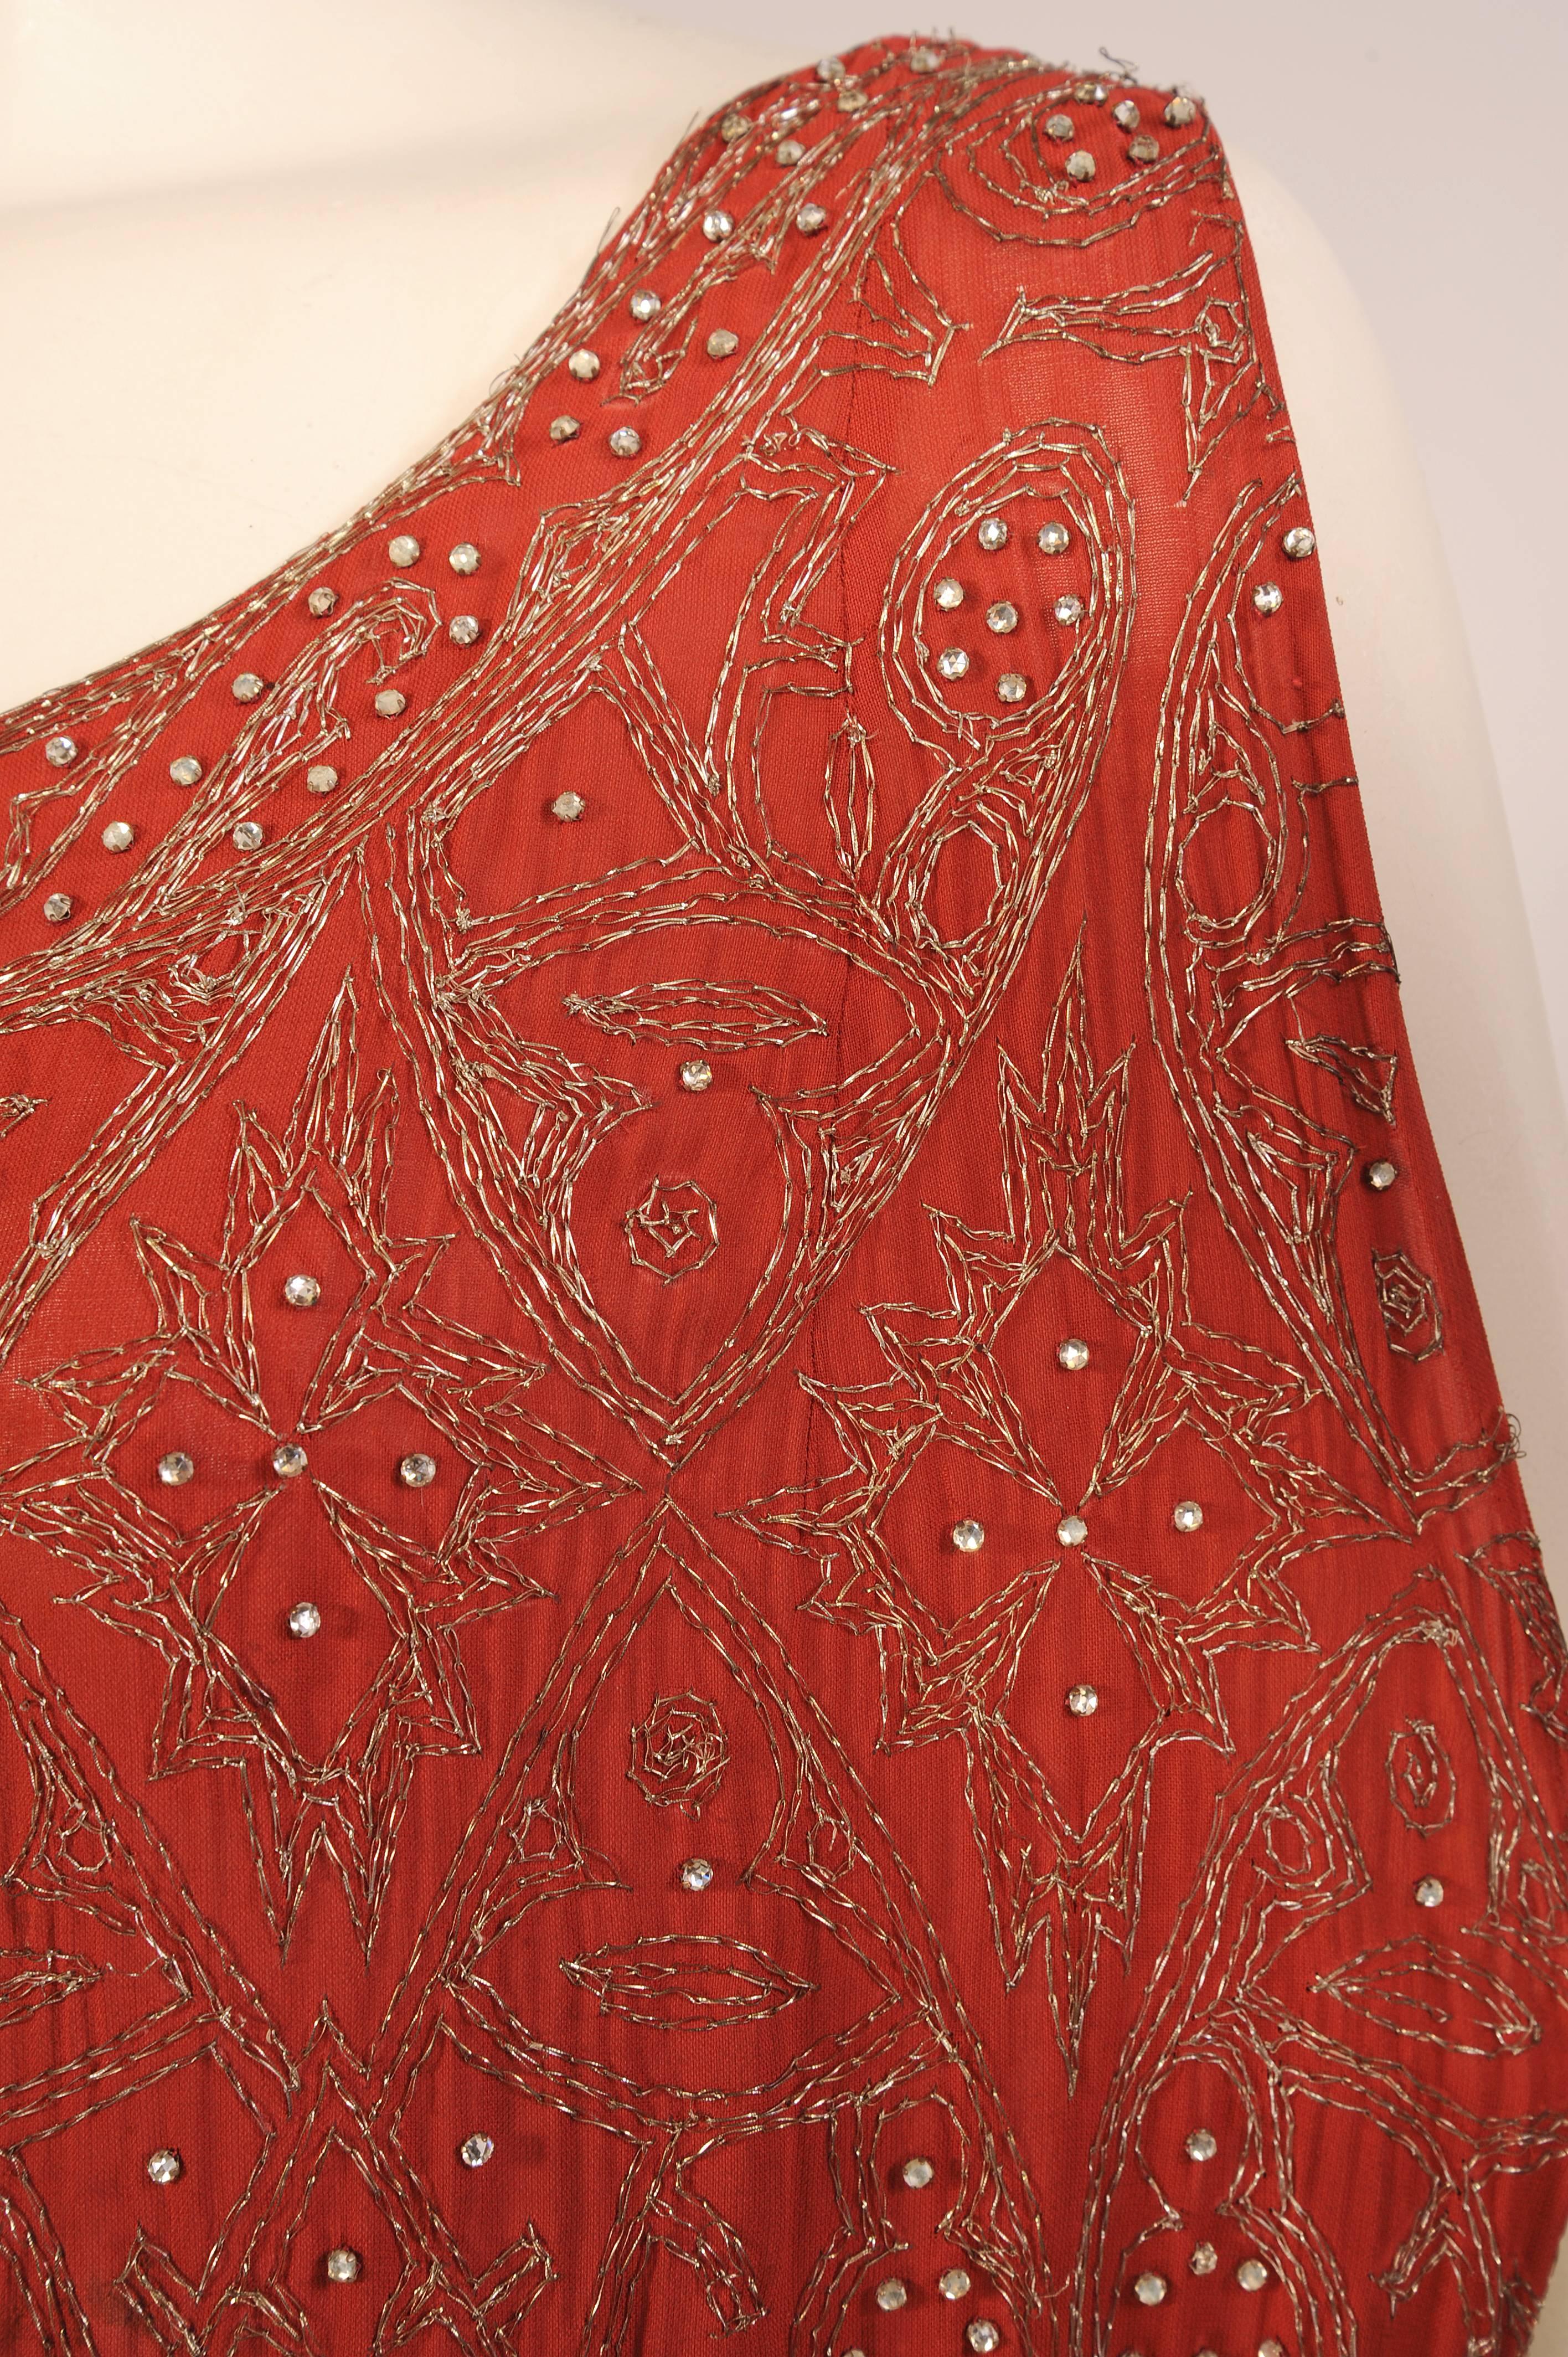 1920's Beaded and Embroidered Red Evening Dress, Rare Larger Size 1